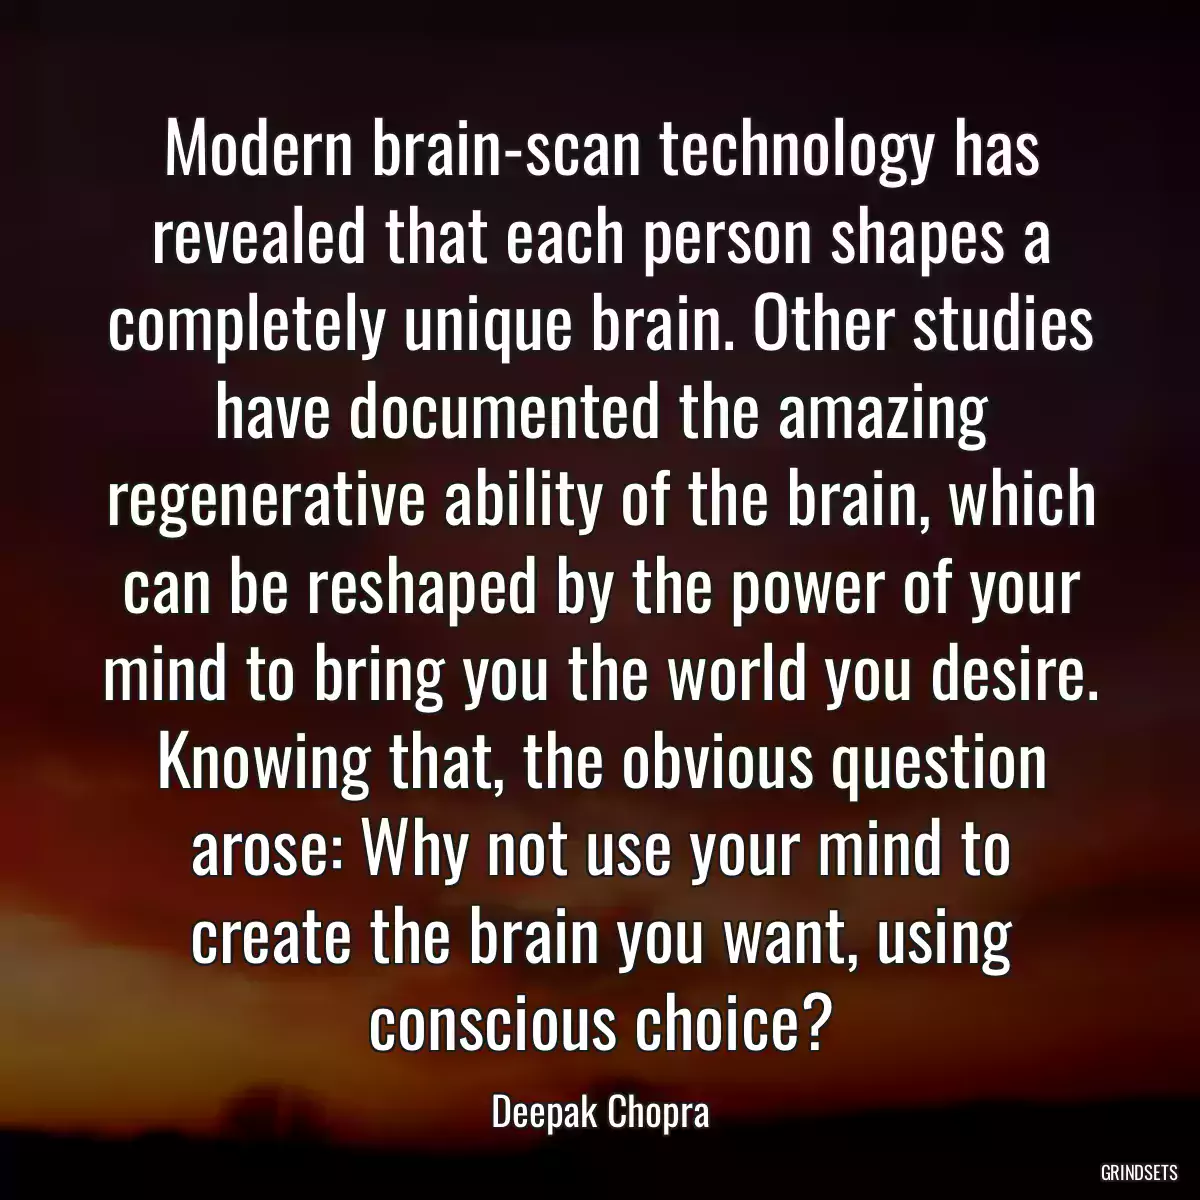 Modern brain-scan technology has revealed that each person shapes a completely unique brain. Other studies have documented the amazing regenerative ability of the brain, which can be reshaped by the power of your mind to bring you the world you desire. Knowing that, the obvious question arose: Why not use your mind to create the brain you want, using conscious choice?